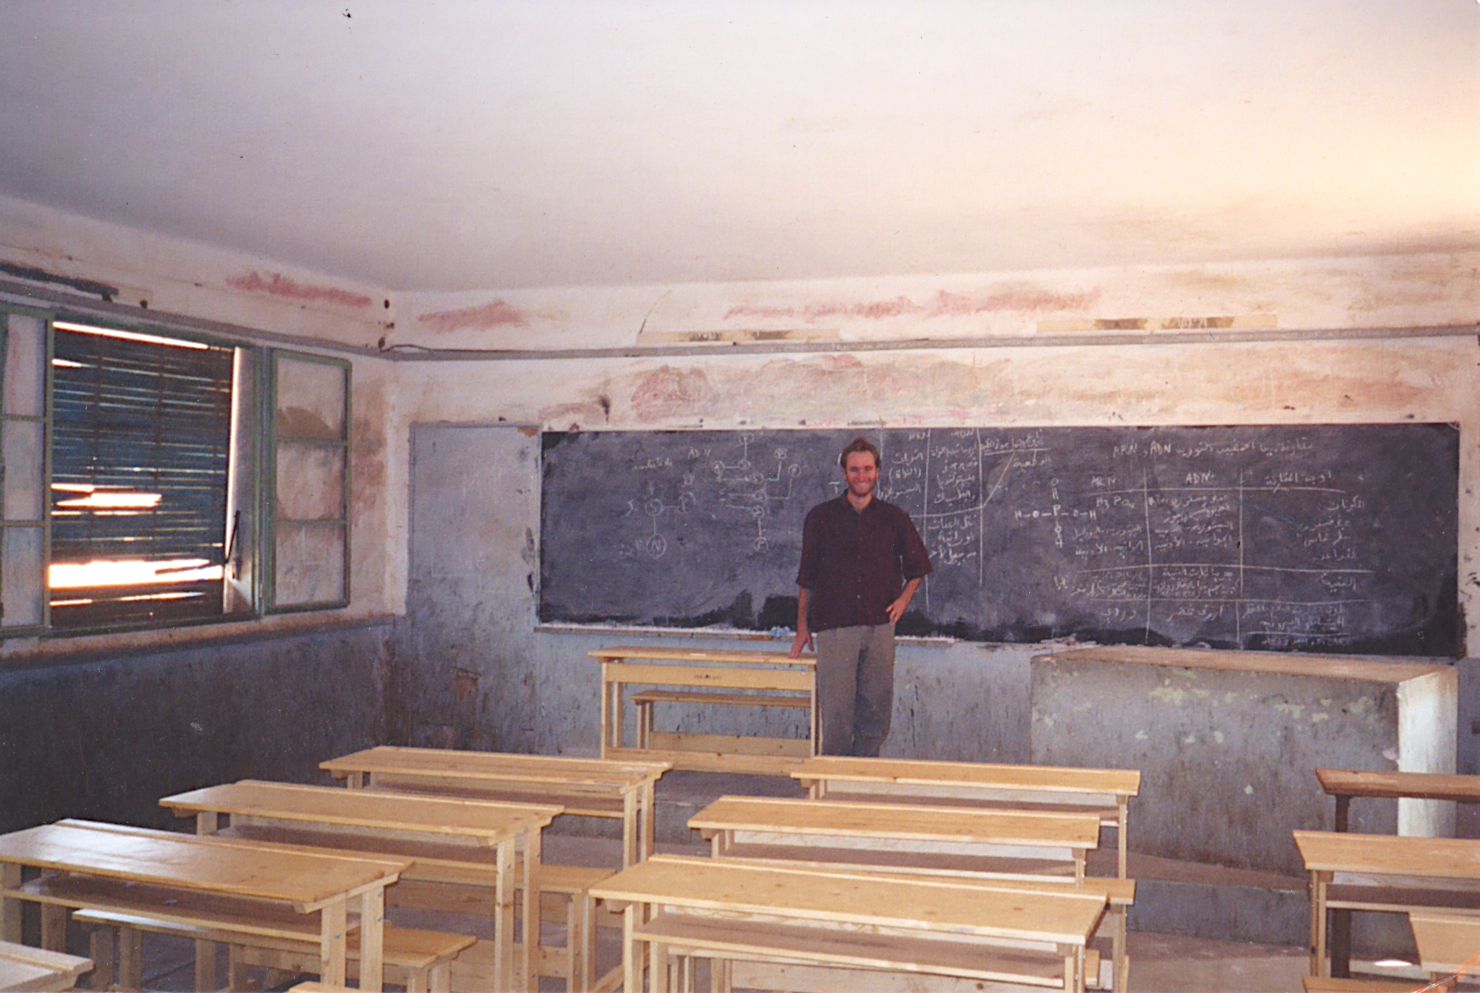 John is standing at the head of a classroom facing the viewer. Behind him is a dusty chalkboard nearly the length of the wall. In front of him stand several bench-style desks, for two kids each. The walls are dirty; paint is chipping off surfaces; the shutters in the window are blocking the sunlight except where they are broken.